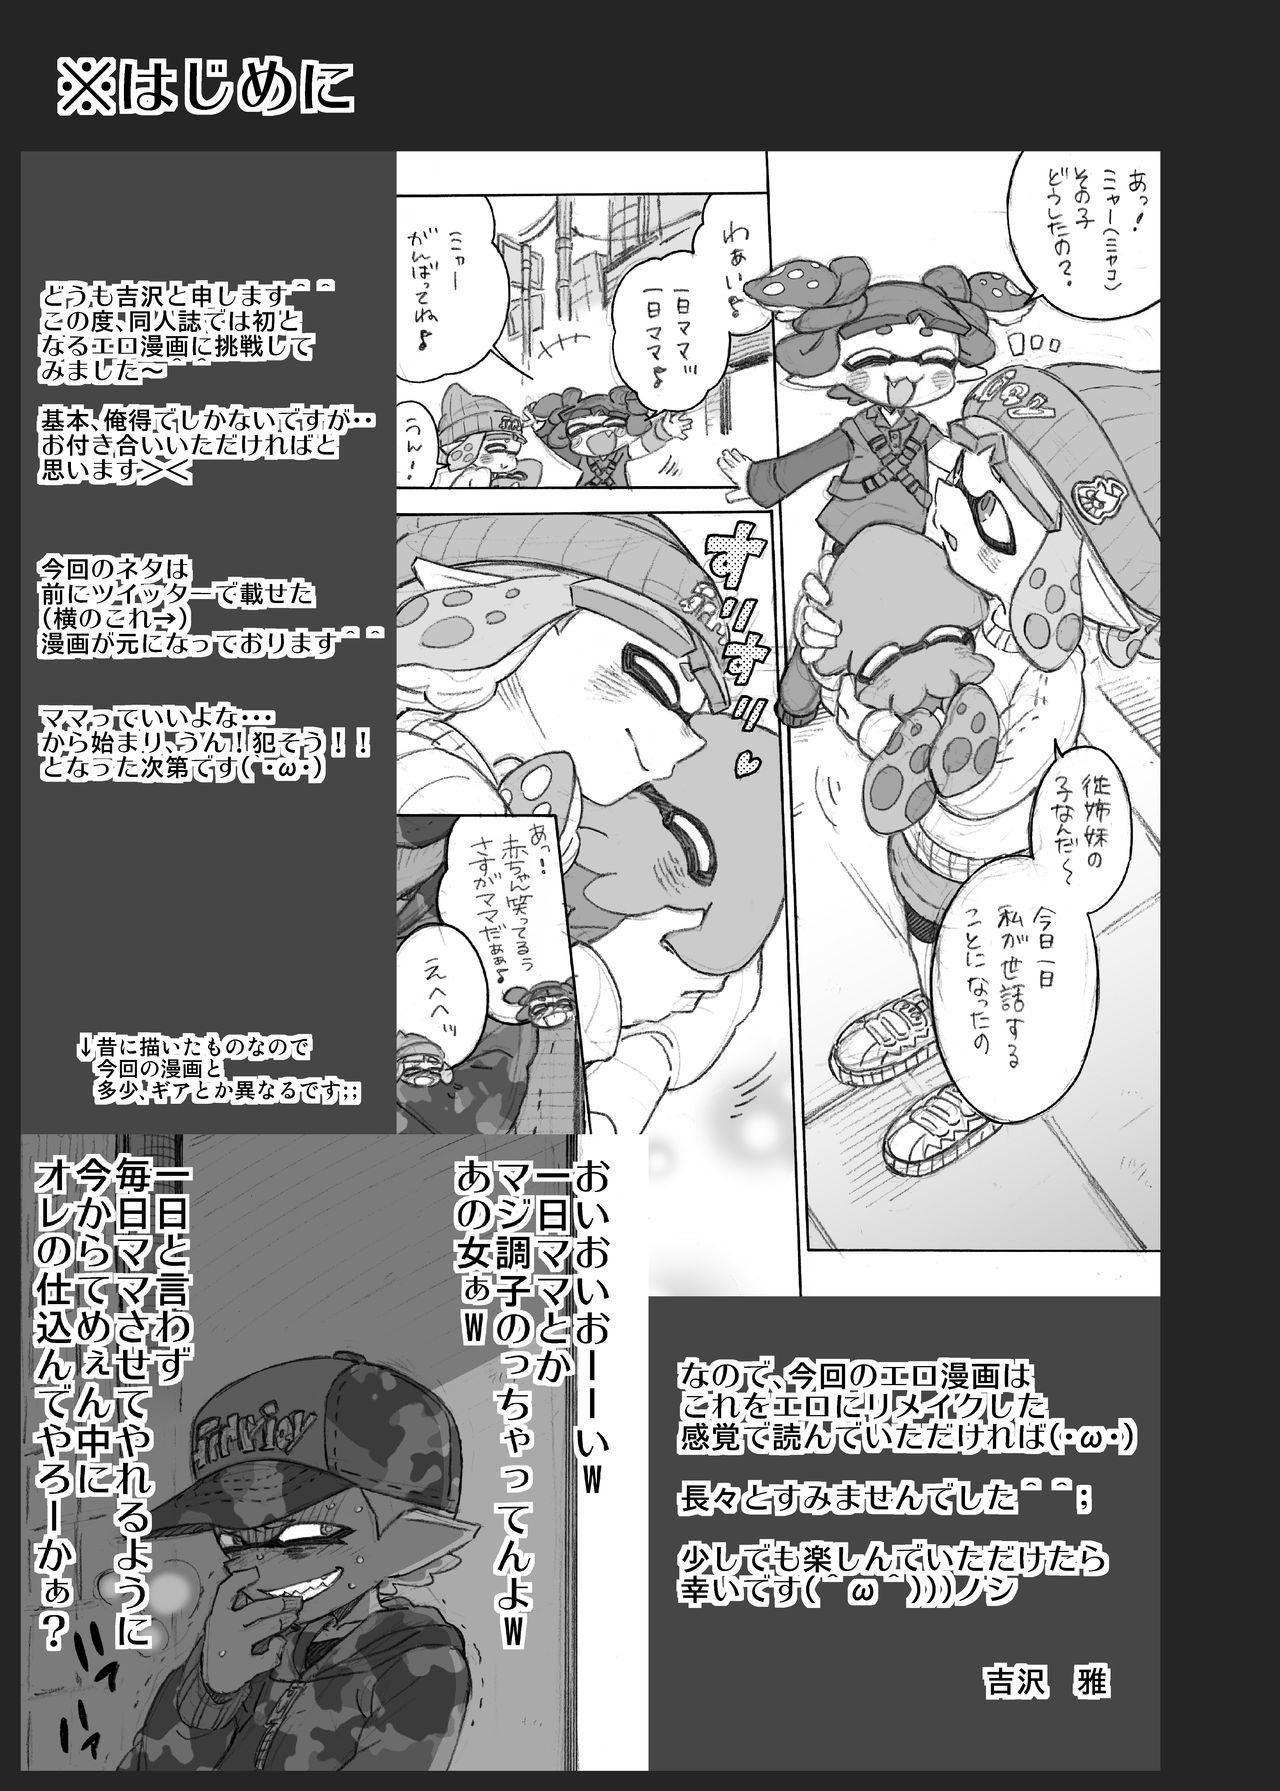 Sex Let's make that anxious daughter a mama - Splatoon Hard Core Free Porn - Page 2